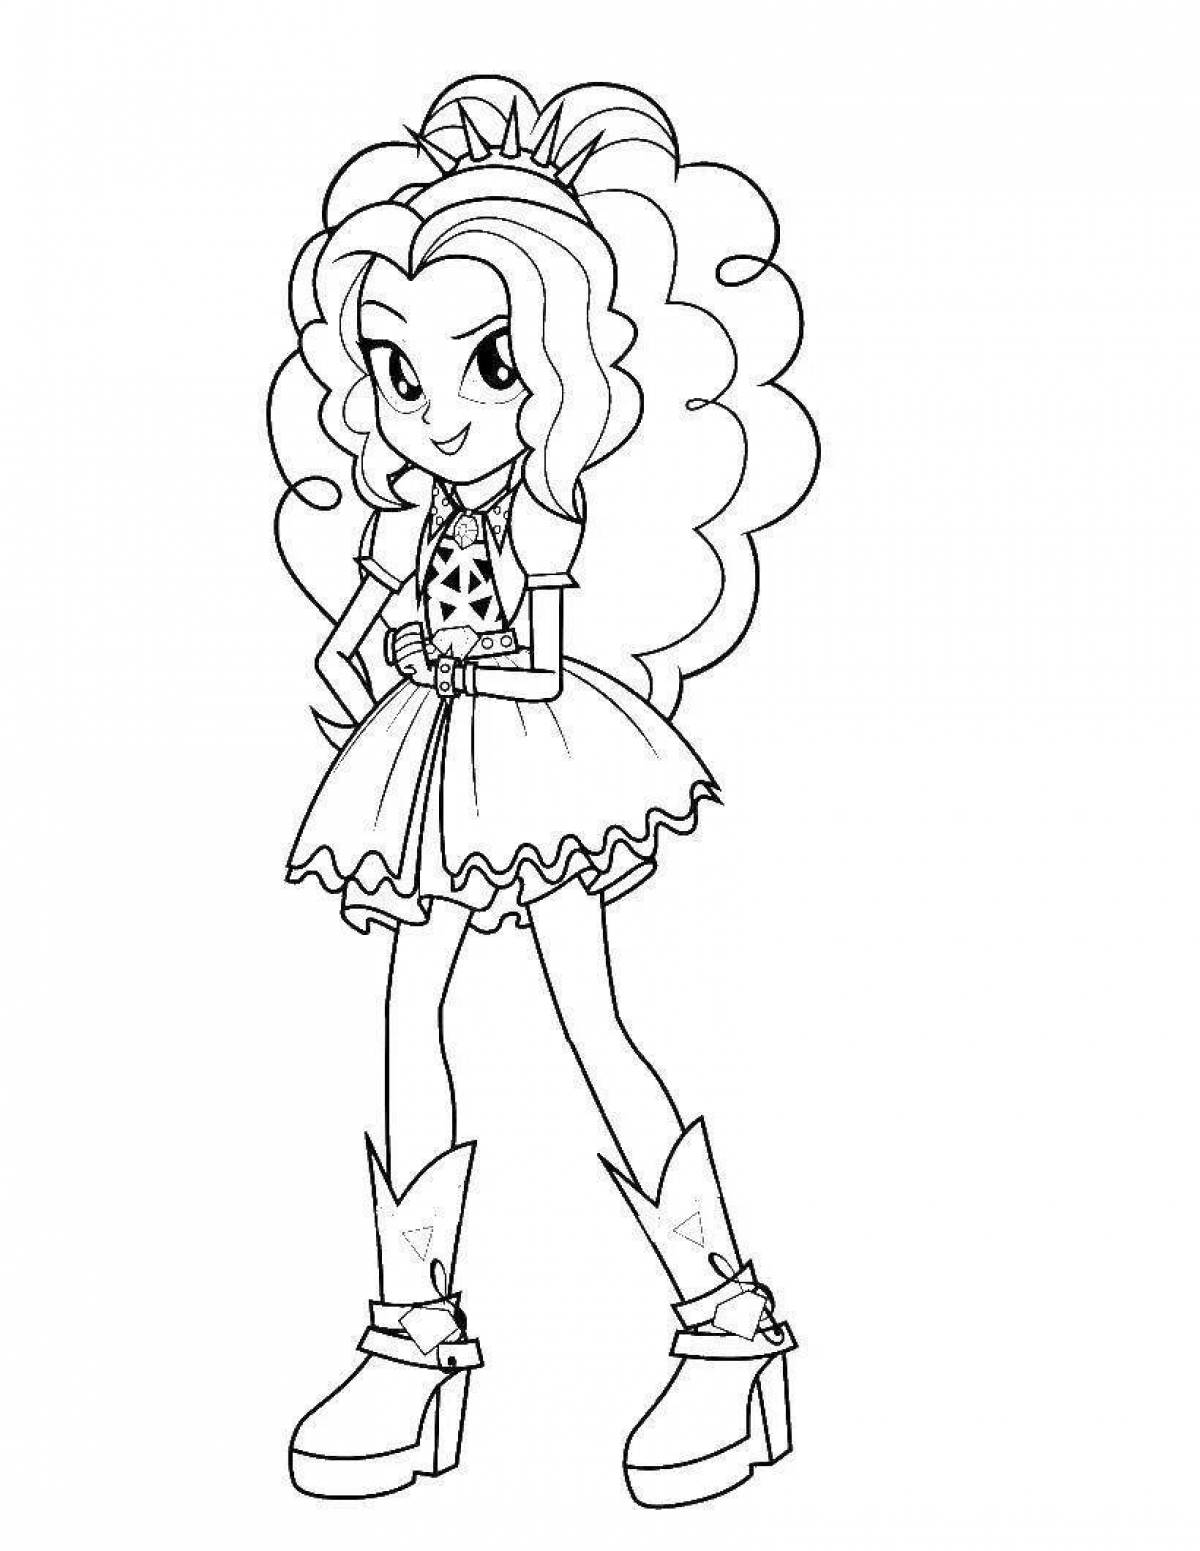 Playful pony doll coloring page